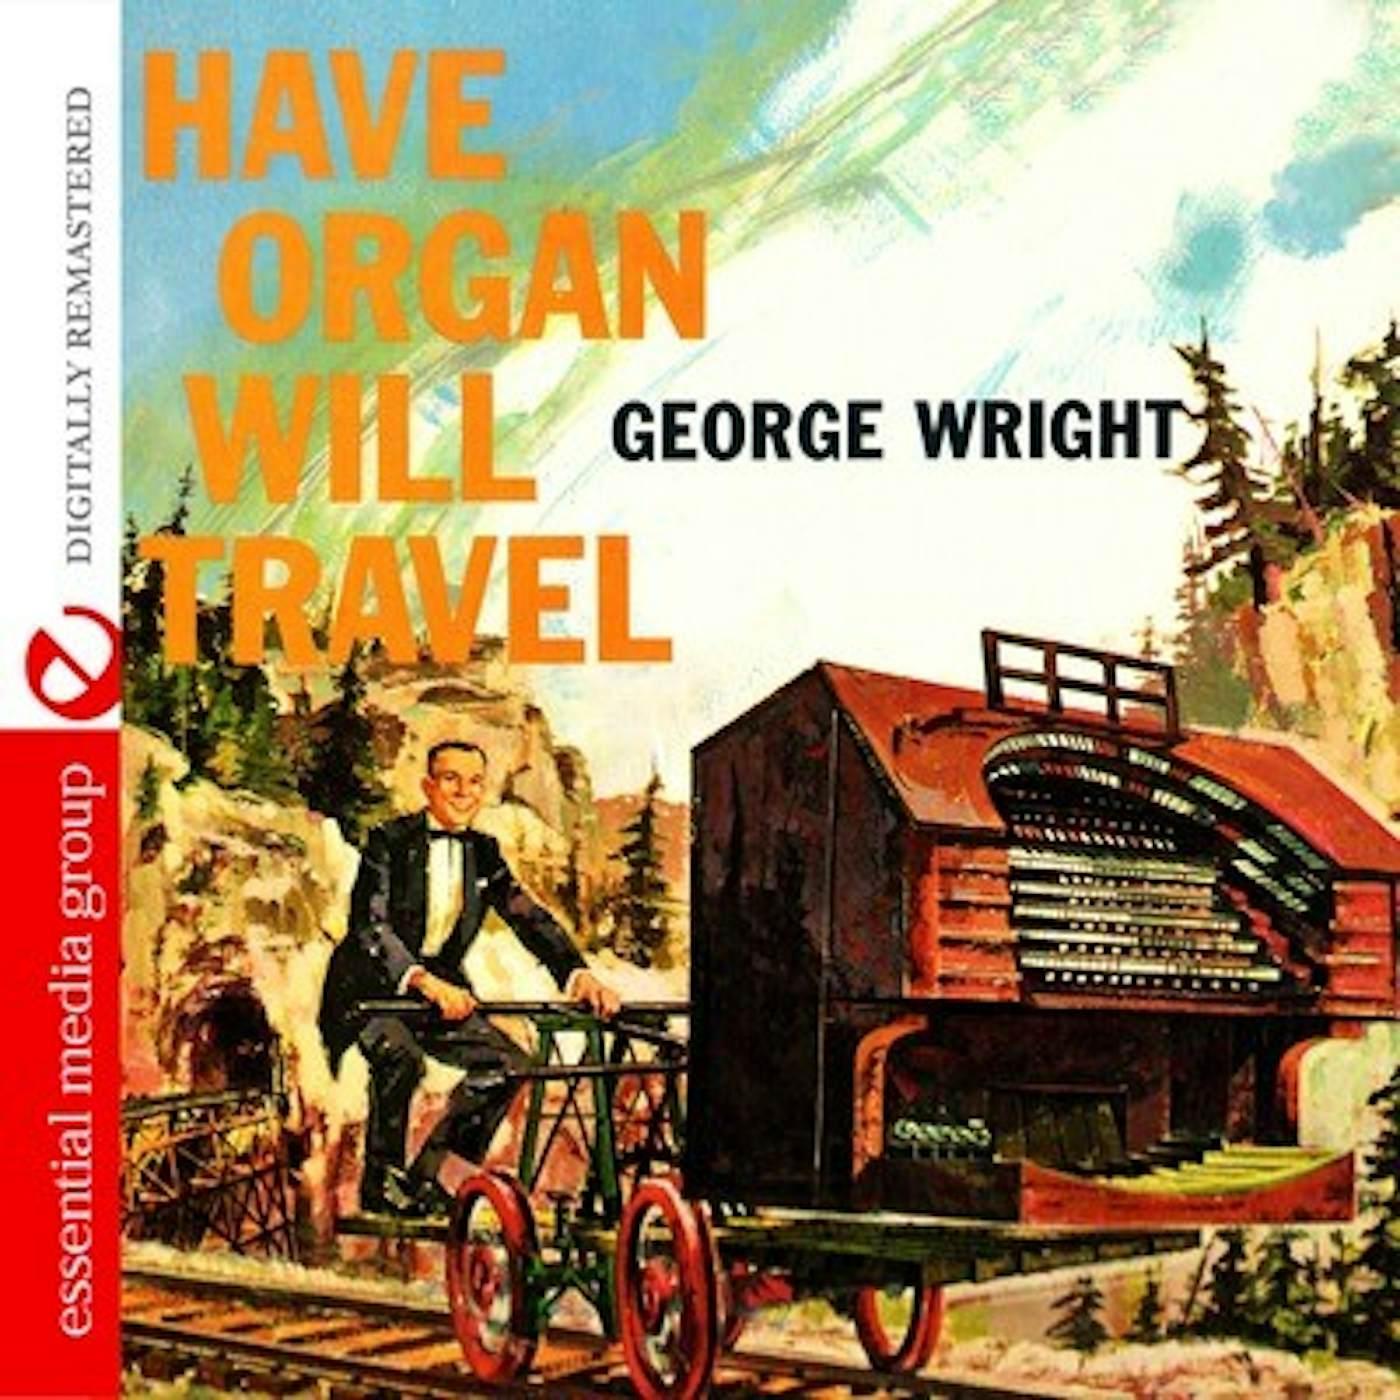 George Wright HAVE ORGAN WILL TRAVEL CD